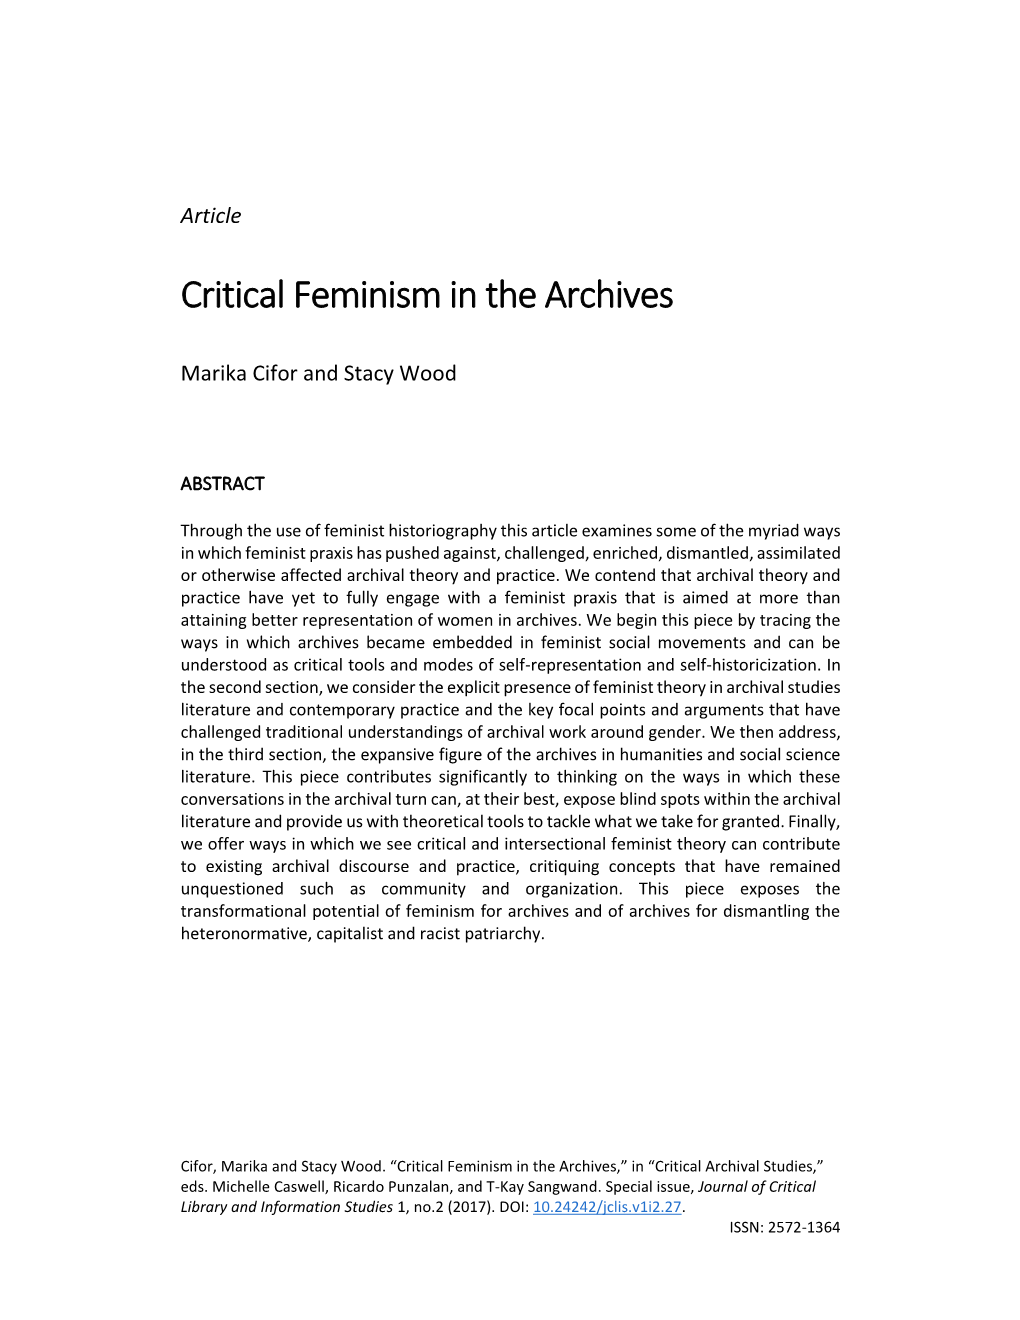 Critical Feminism in the Archives